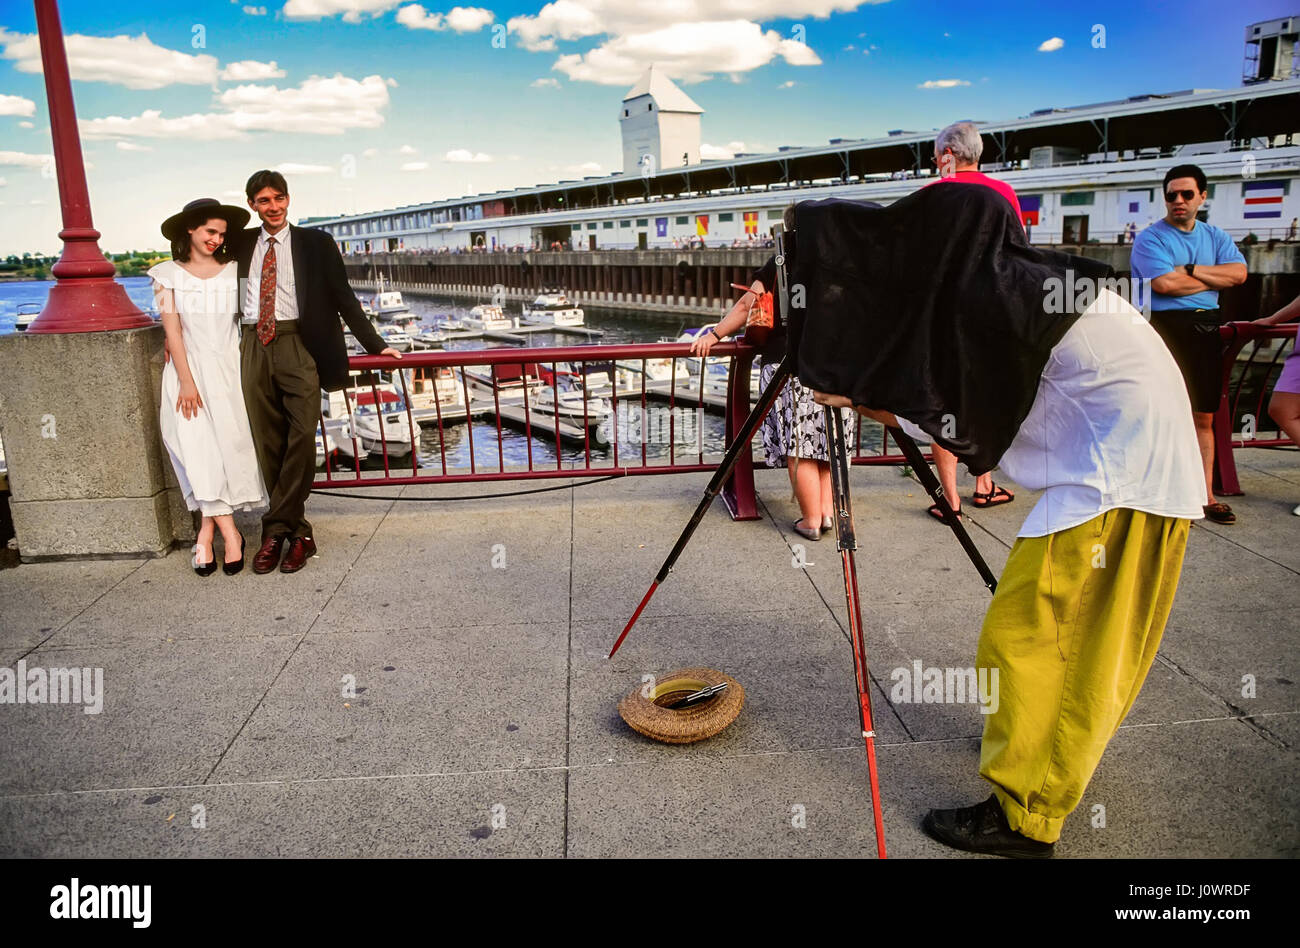 A street photographer uses a vintage camera at the Old Port of Montreal City, Quebec, Canada. Stock Photo